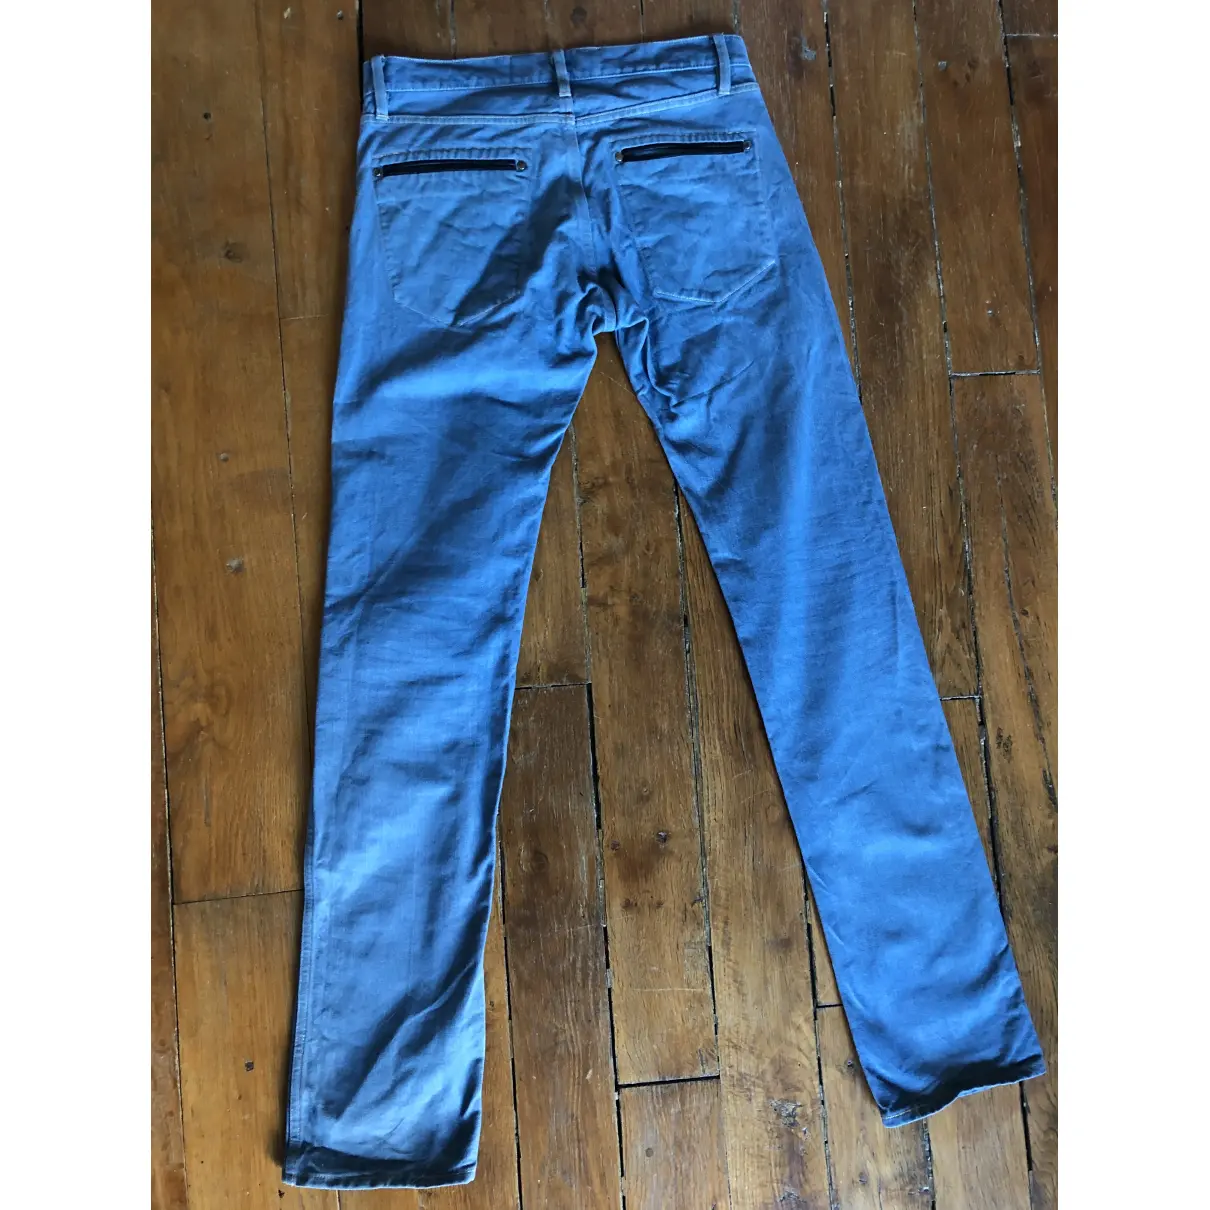 Buy Lemaire Straight jeans online - Vintage